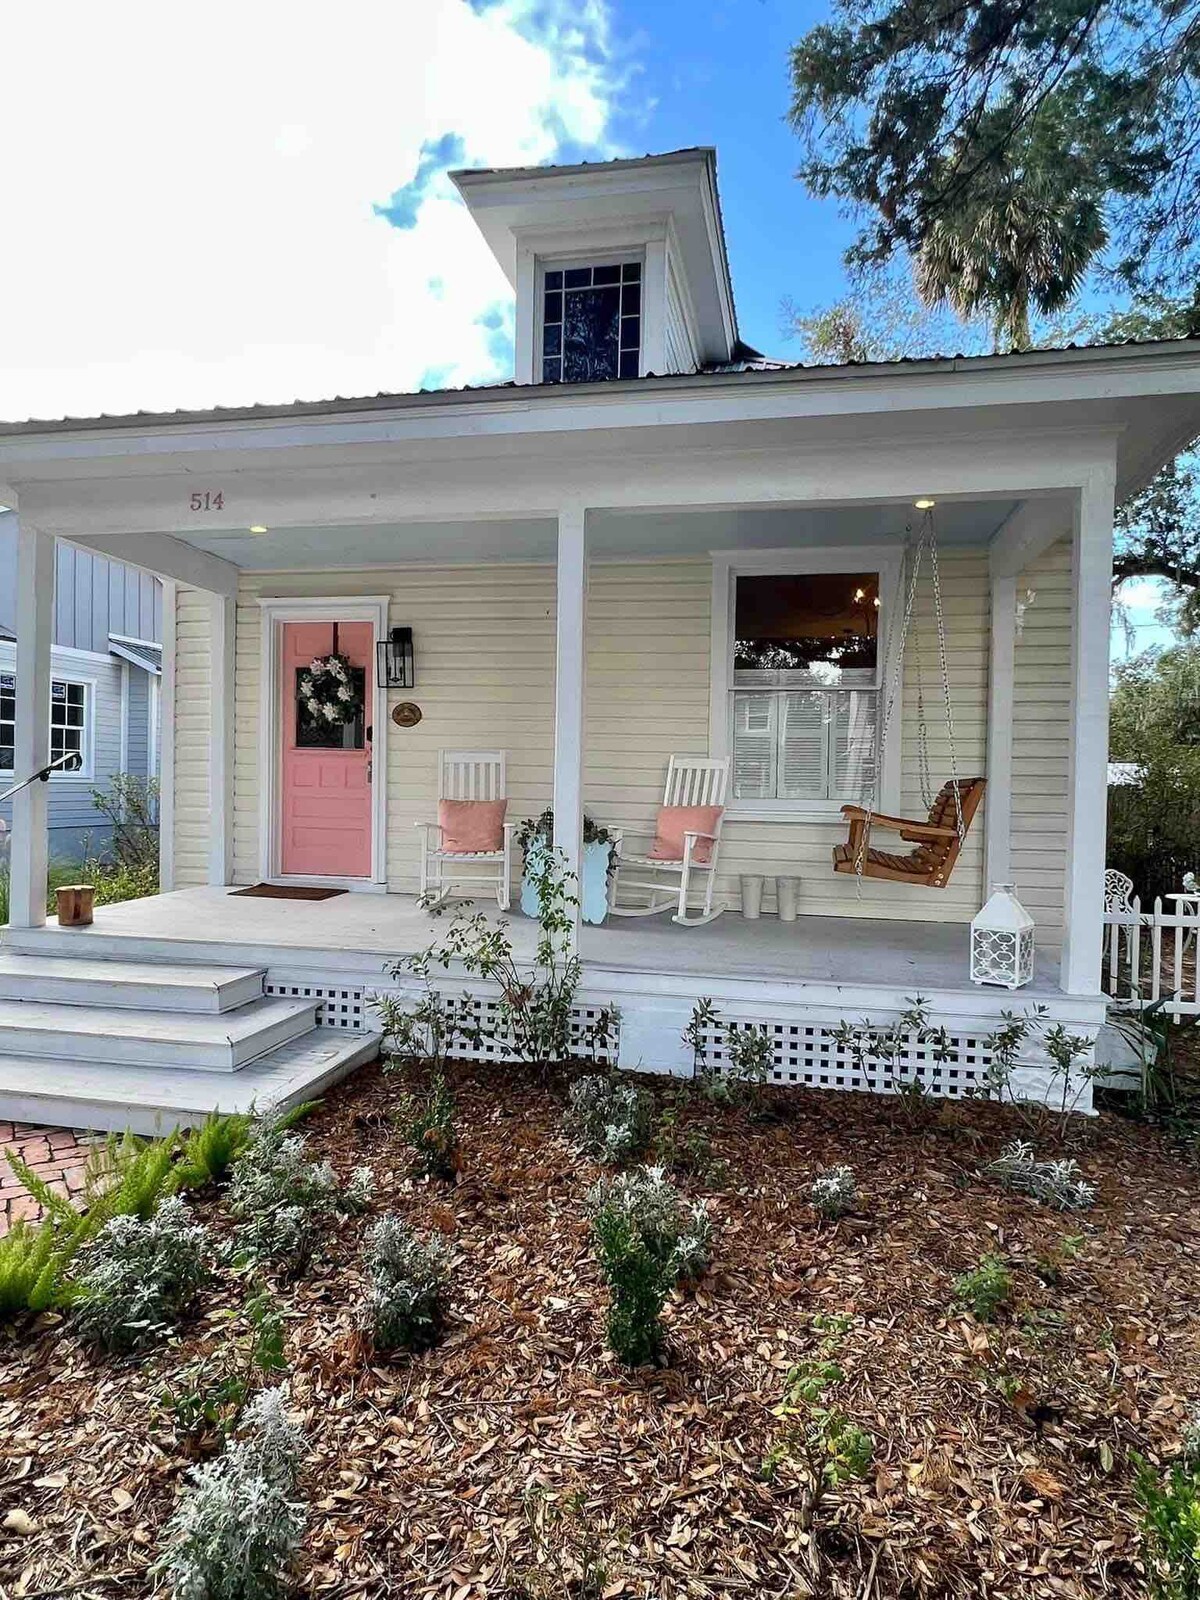 Charming bungalow in the historic district.